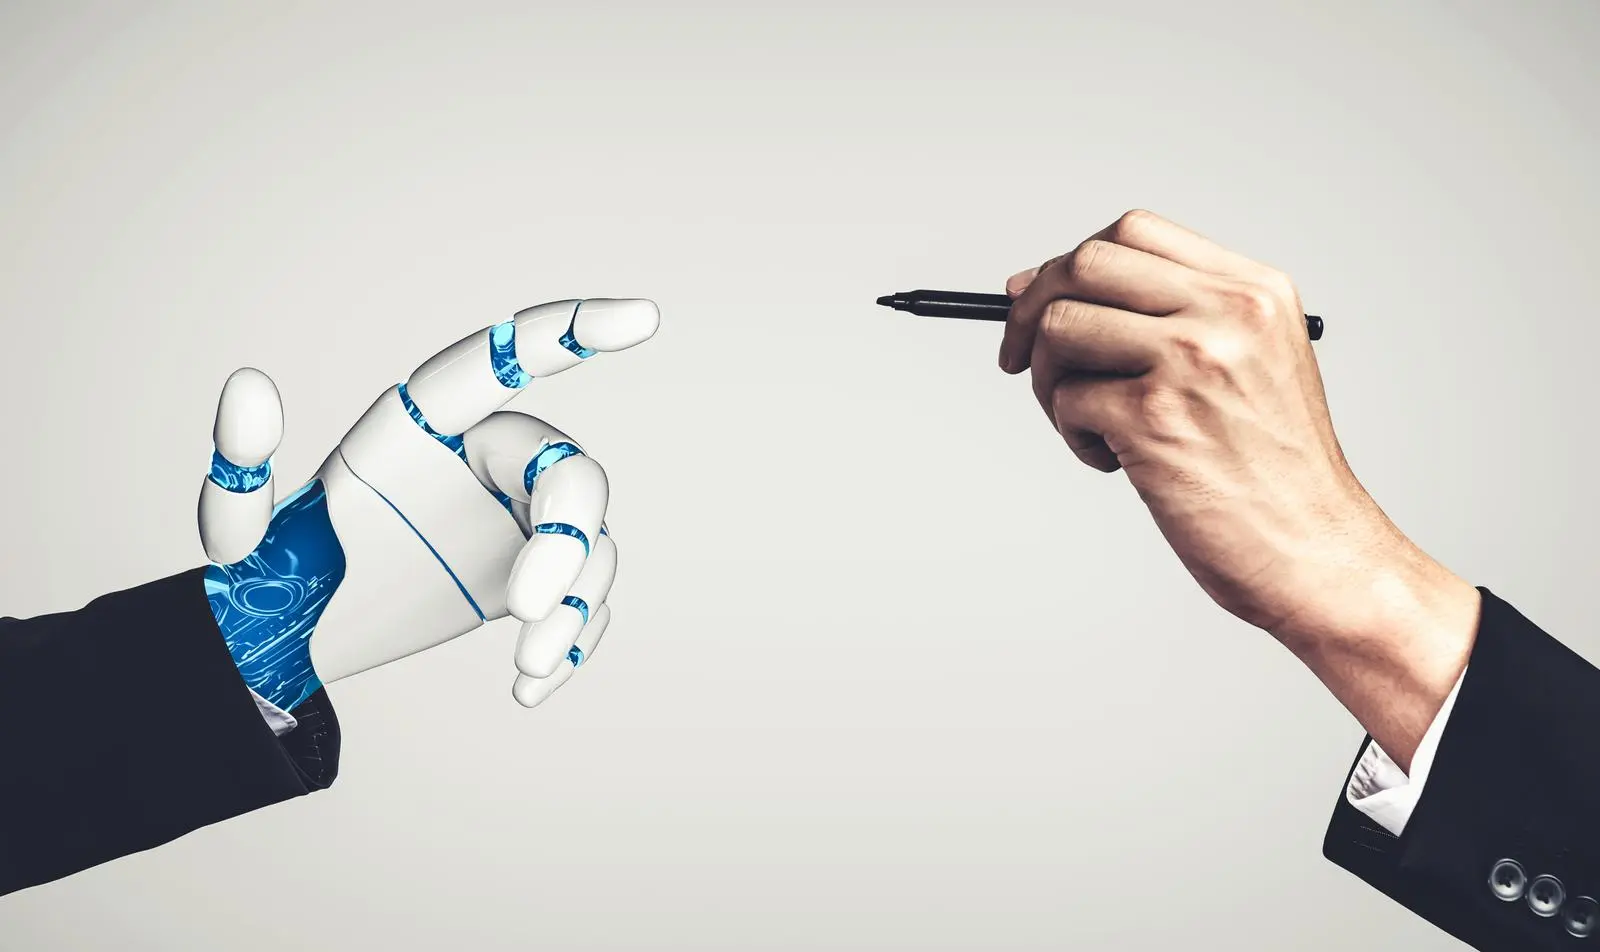 robot hand and a human hand holding a pen